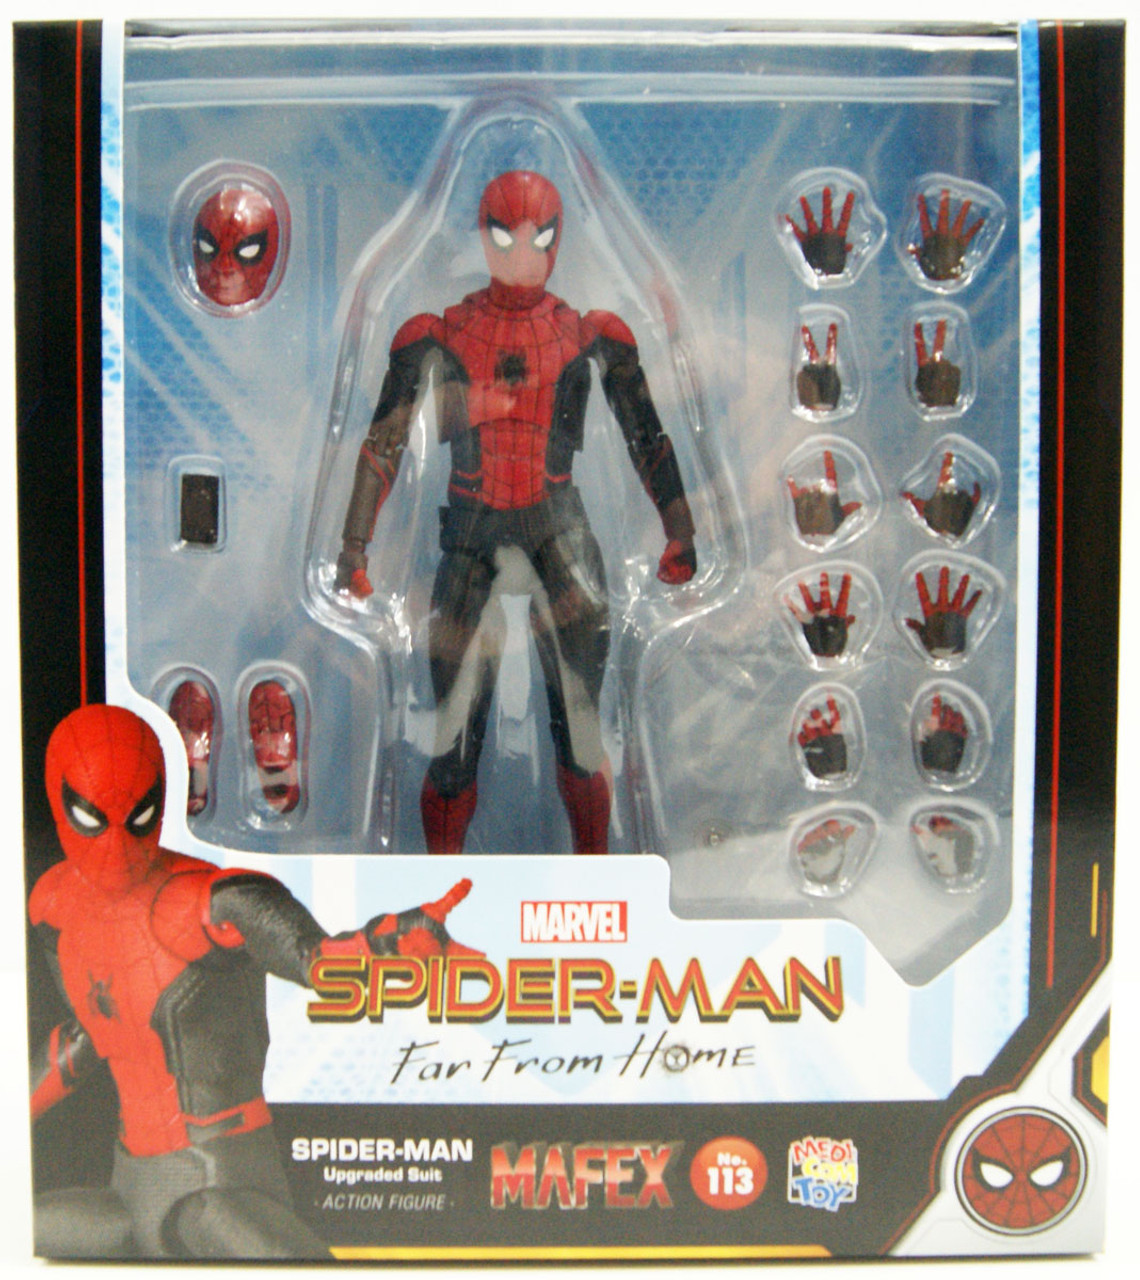 Medicom MAFEX 113 Spider-Man Upgraded Suit Figure (Spider-Man Far From Home)